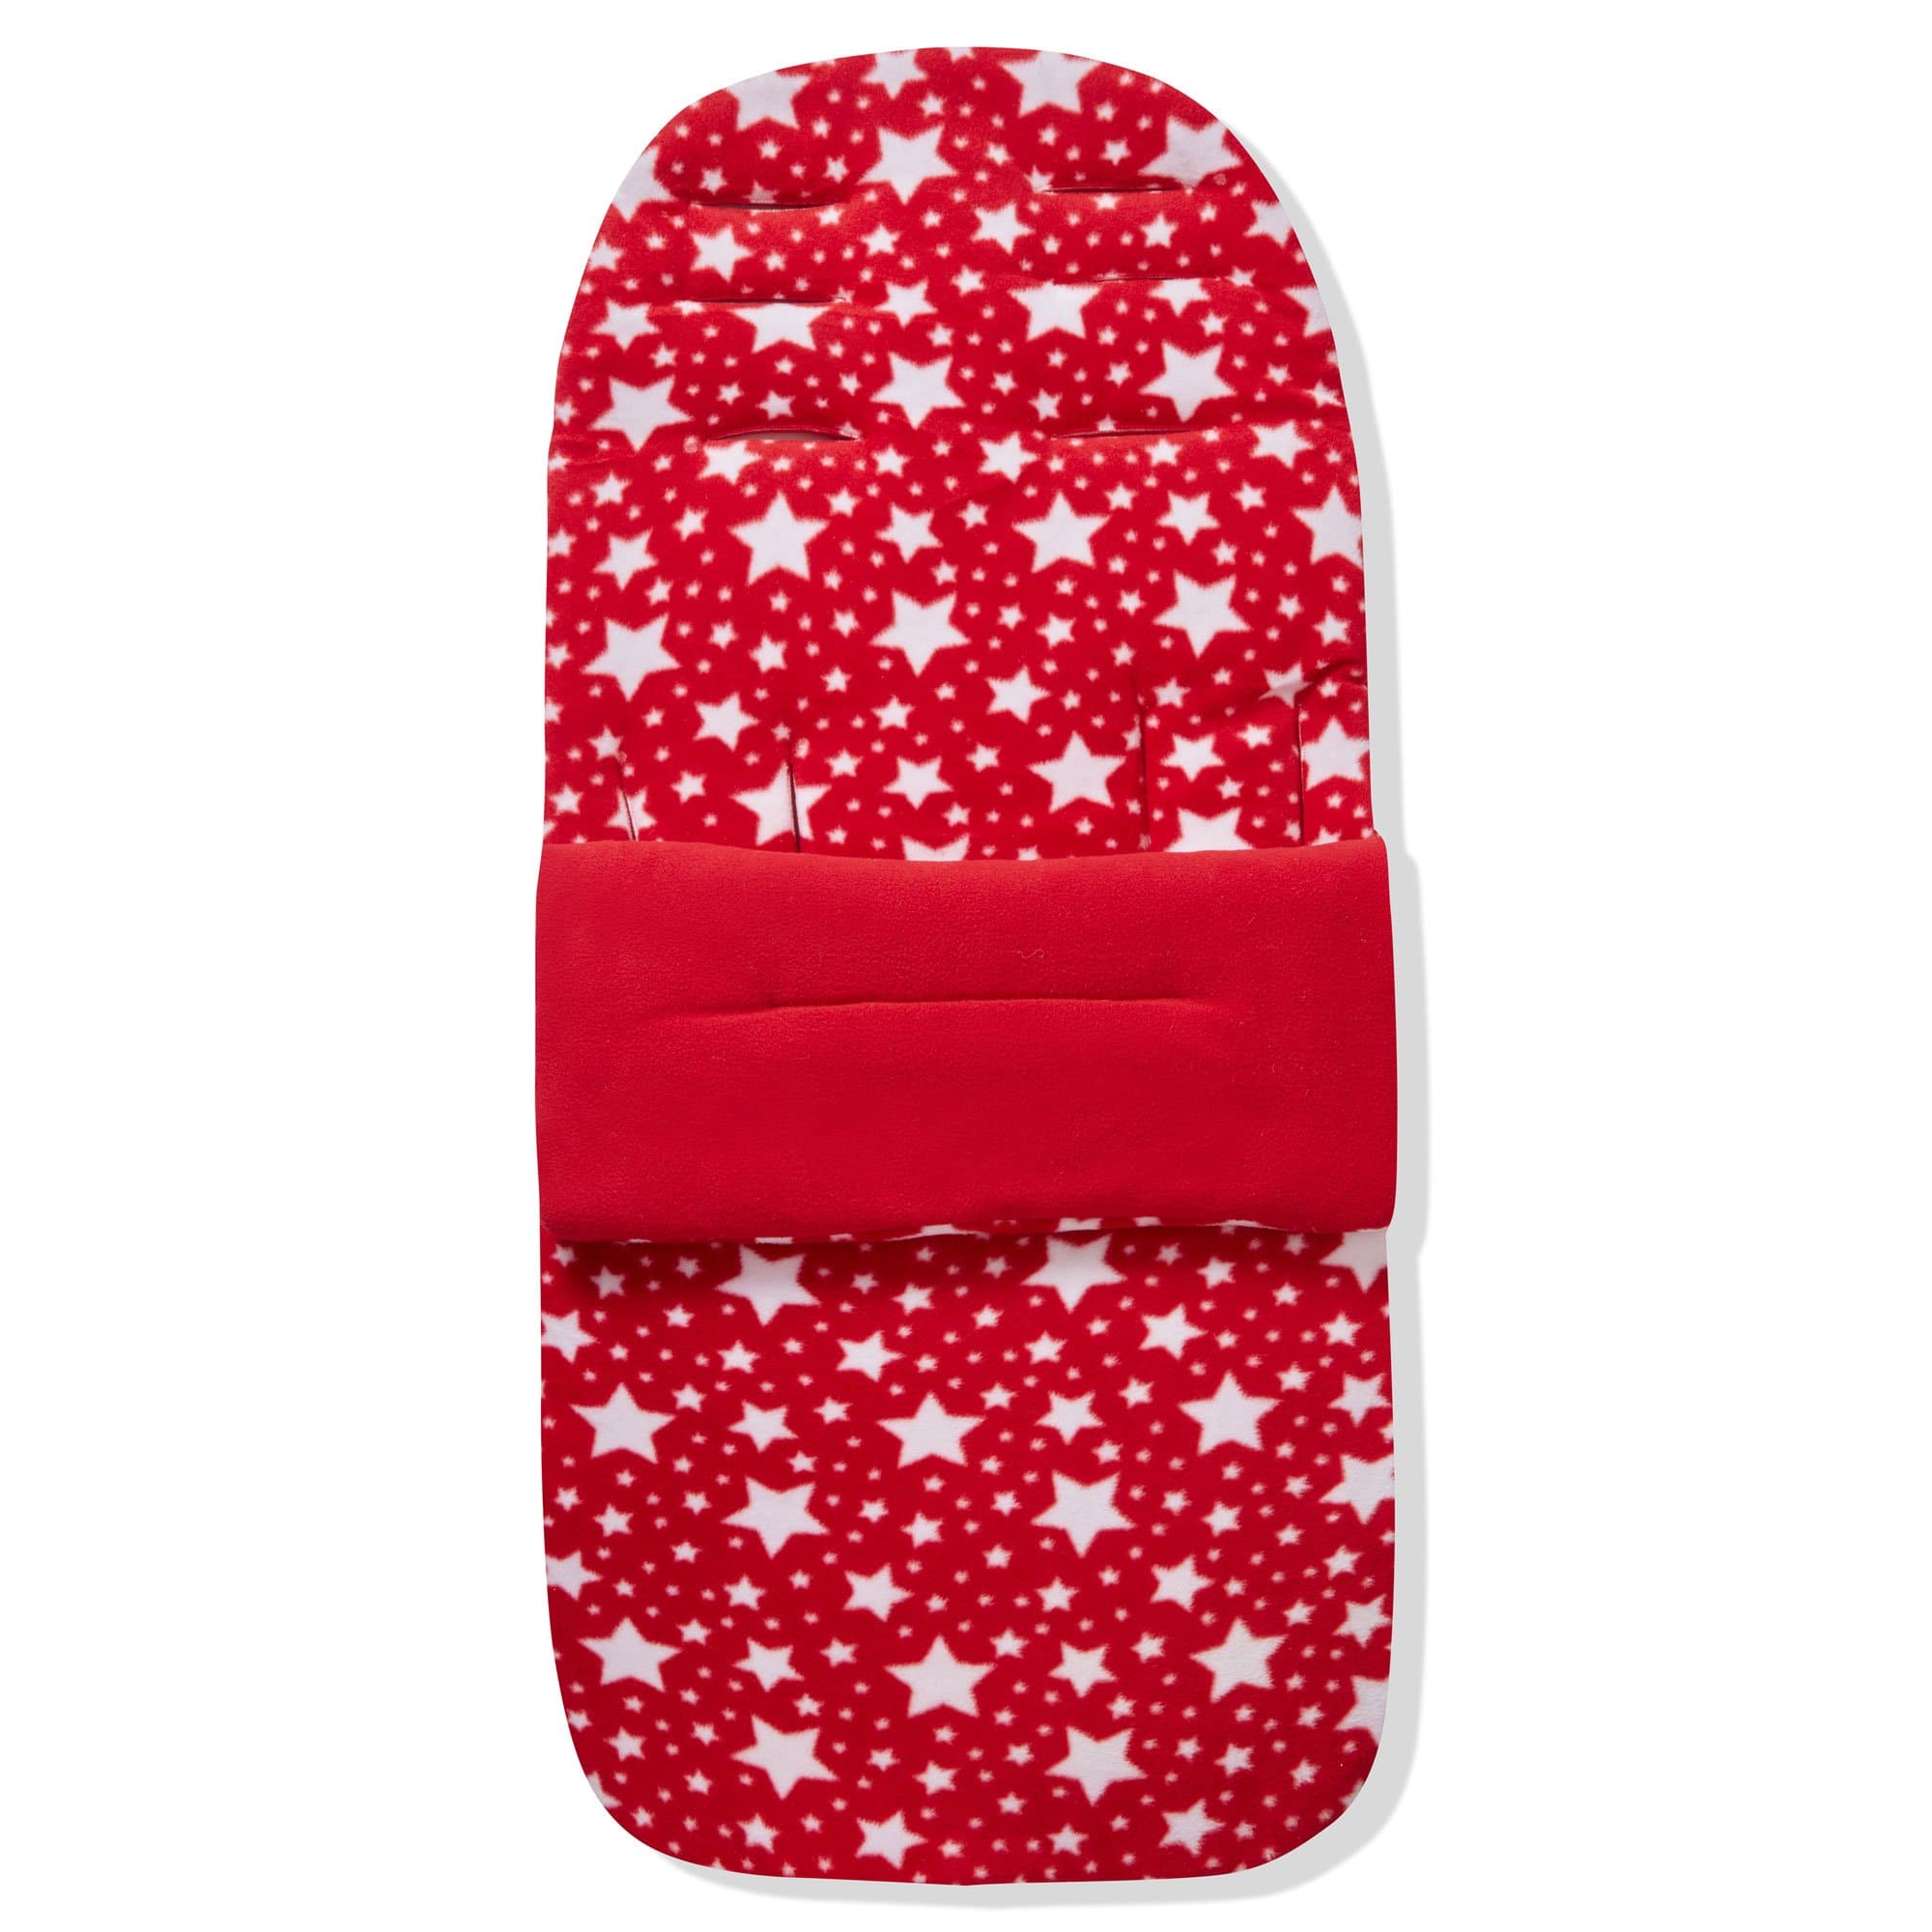 Fleece Footmuff / Cosy Toes Compatible with Safety 1st - Red Star / Fits All Models | For Your Little One